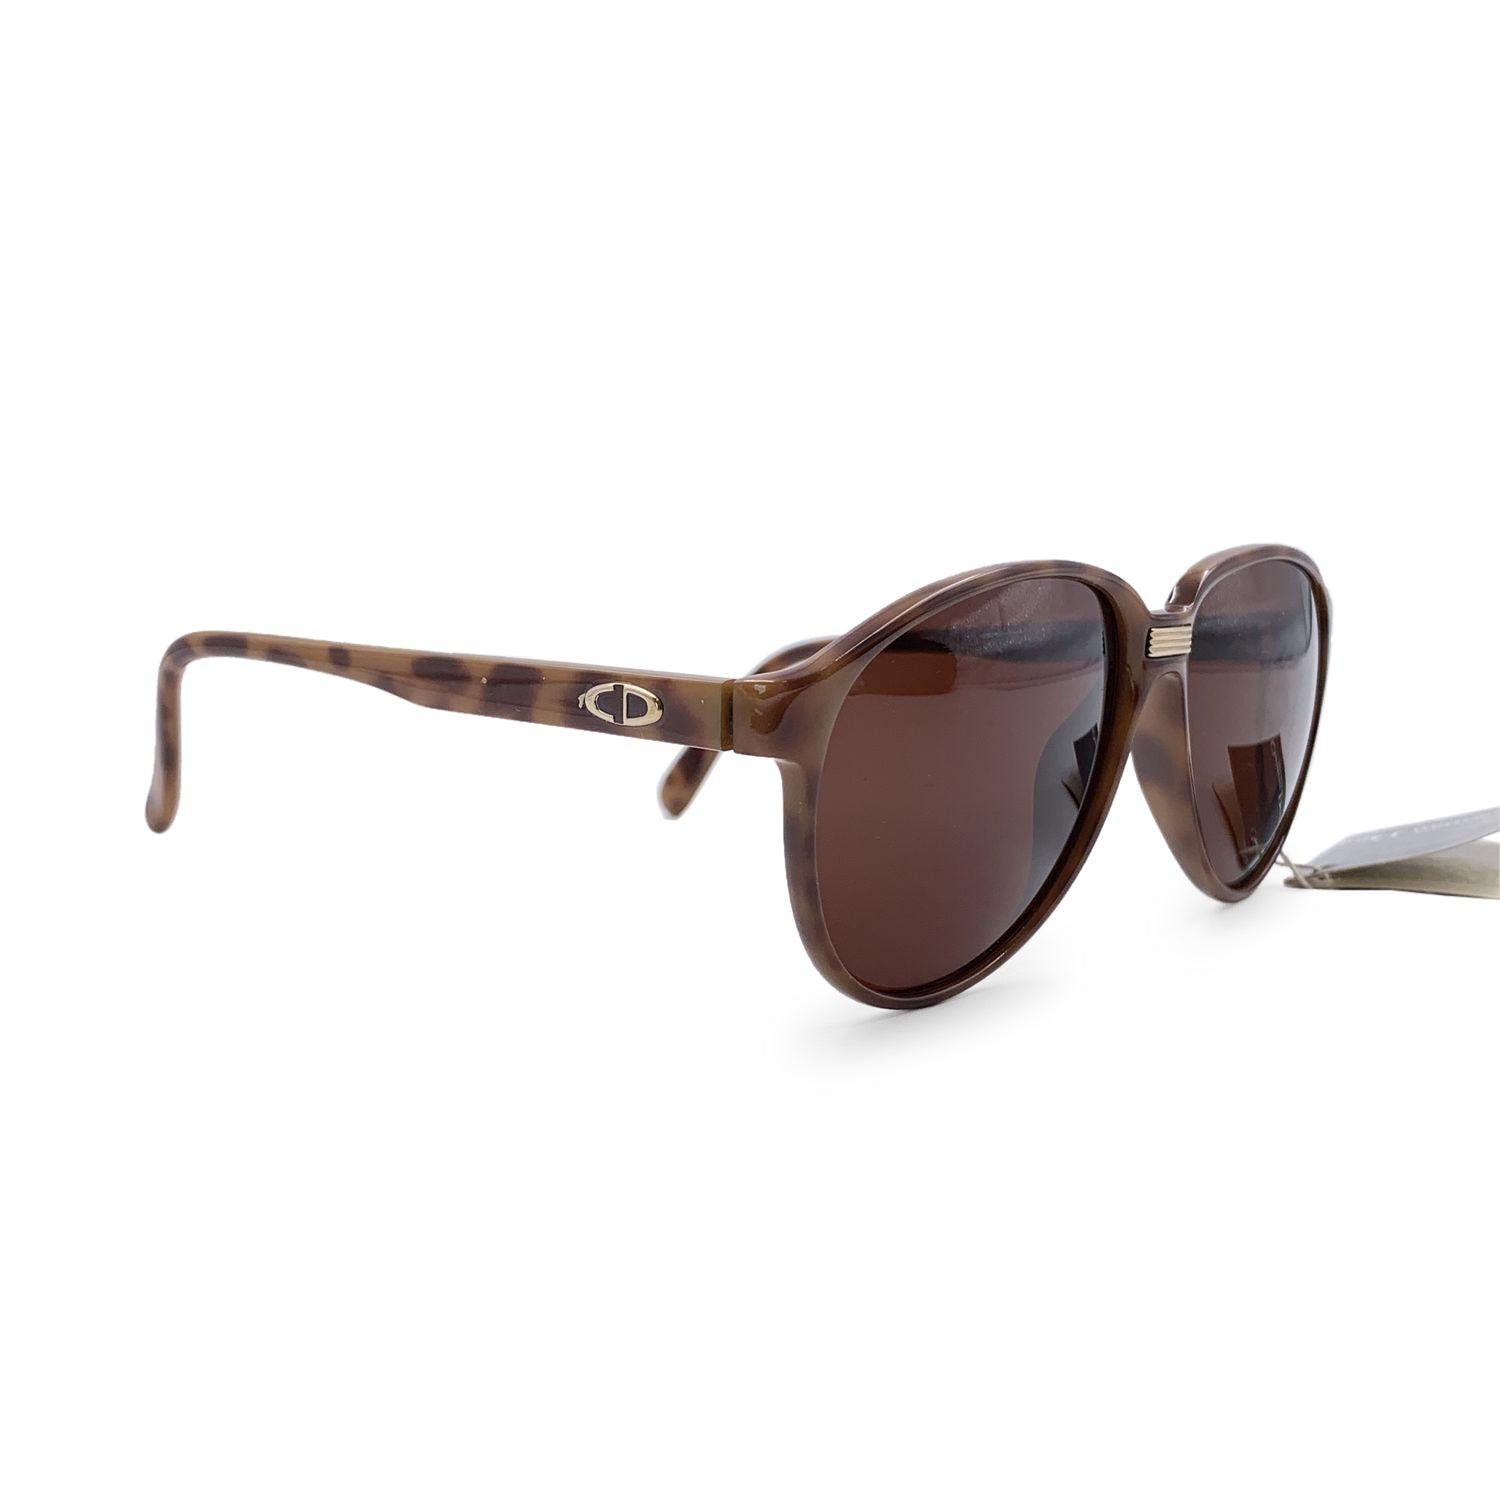 Christian Dior Monsieur Vintage Sunglasses 2352 10 Optyl 60/15 140mm In Excellent Condition For Sale In Rome, Rome